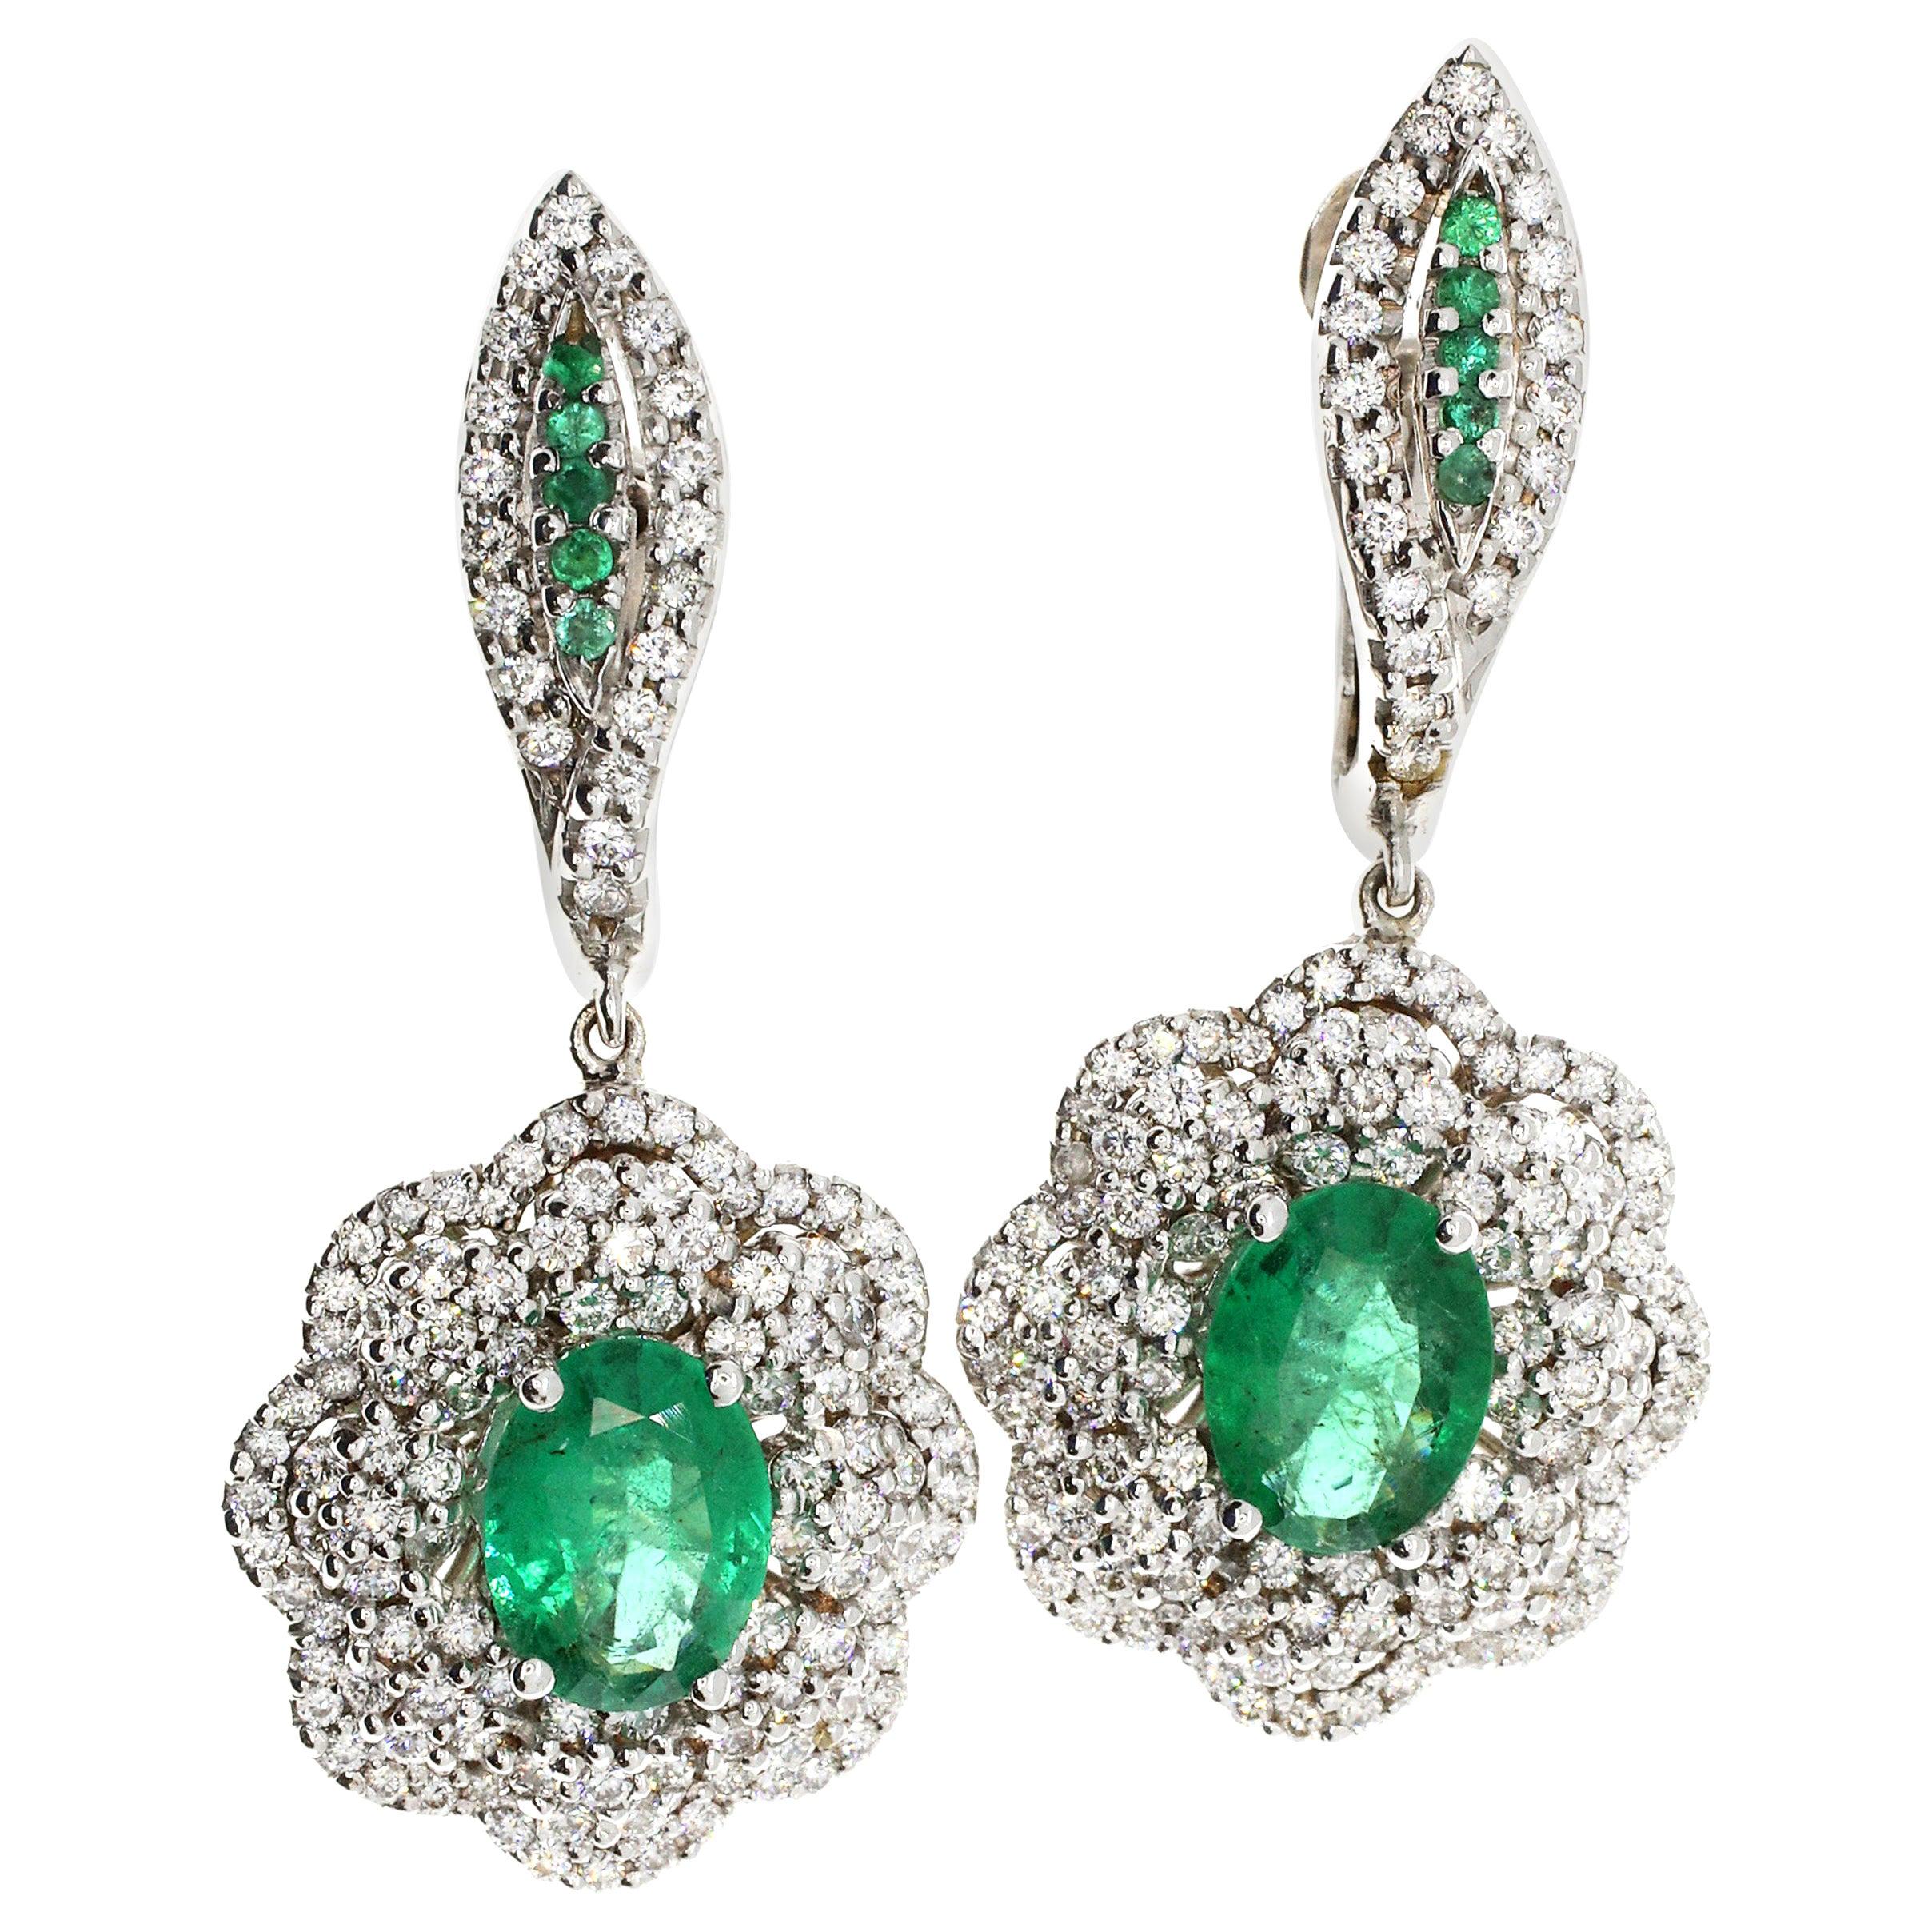 21st Century 18 Karat White Gold 1.48 Carats Diamond and Emerald Earrings  For Sale